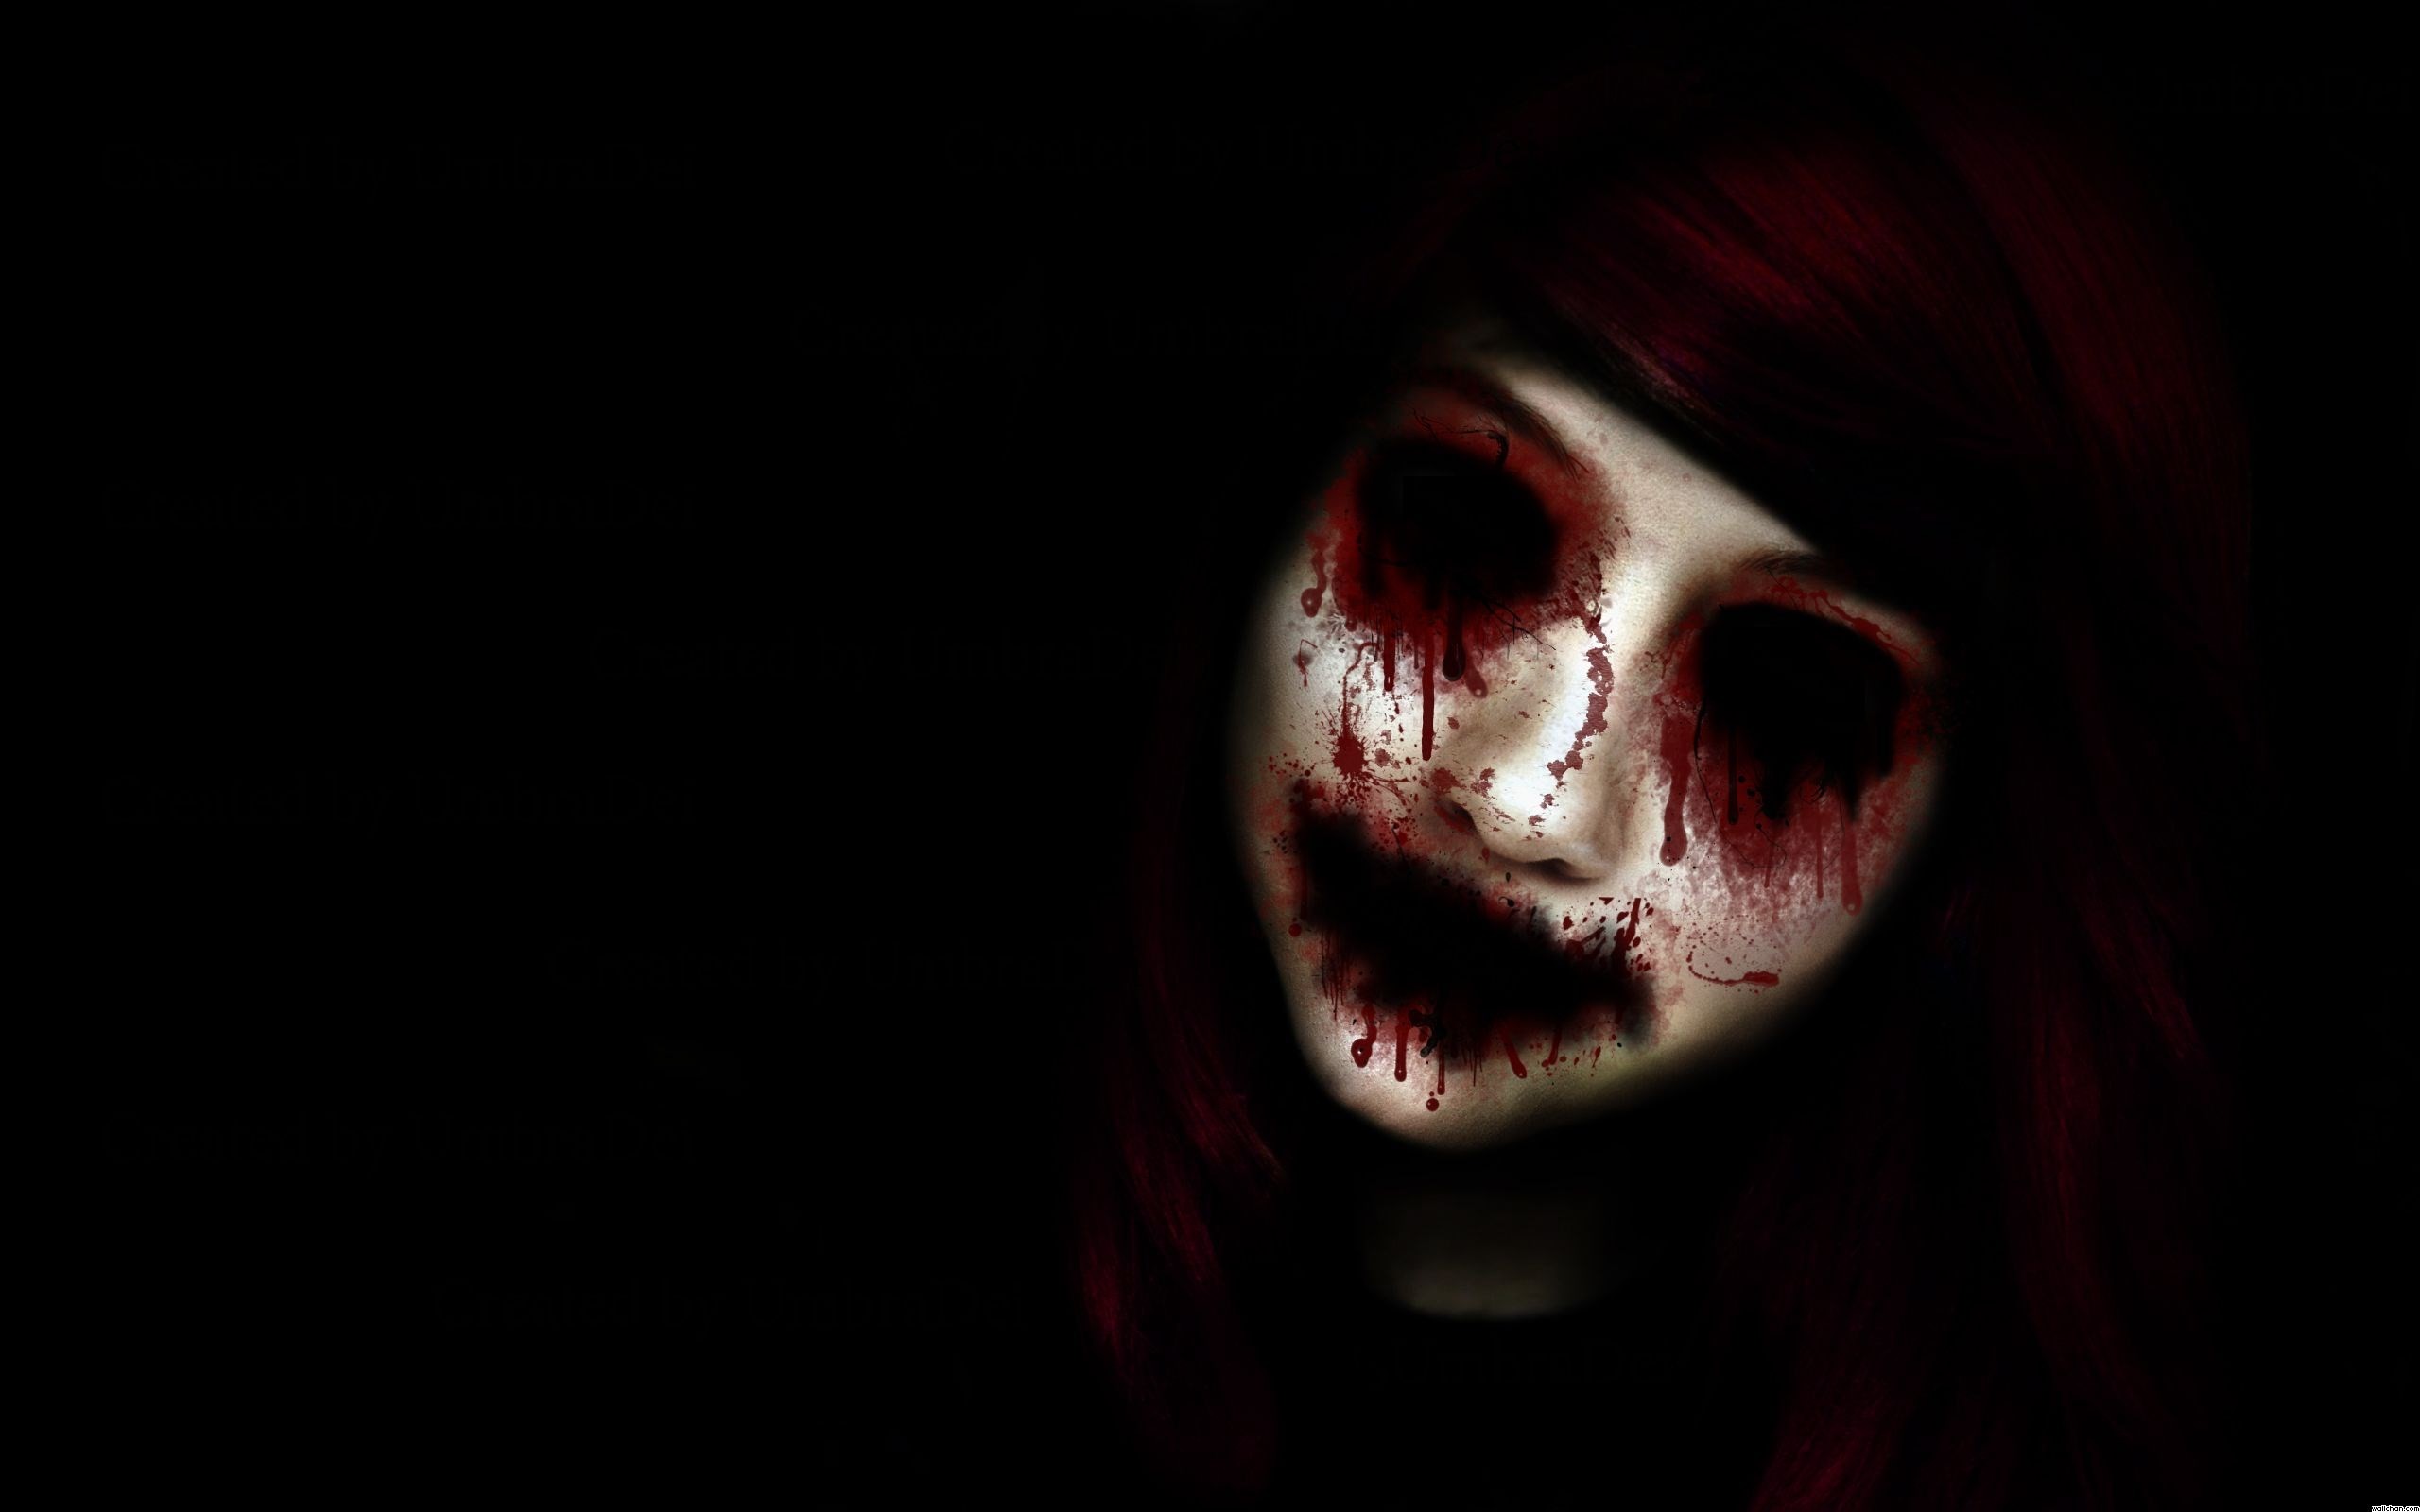 2560x1600 scary face picture - Full HD Wallpapers, Photos, 141 kB - Wilburn Mason